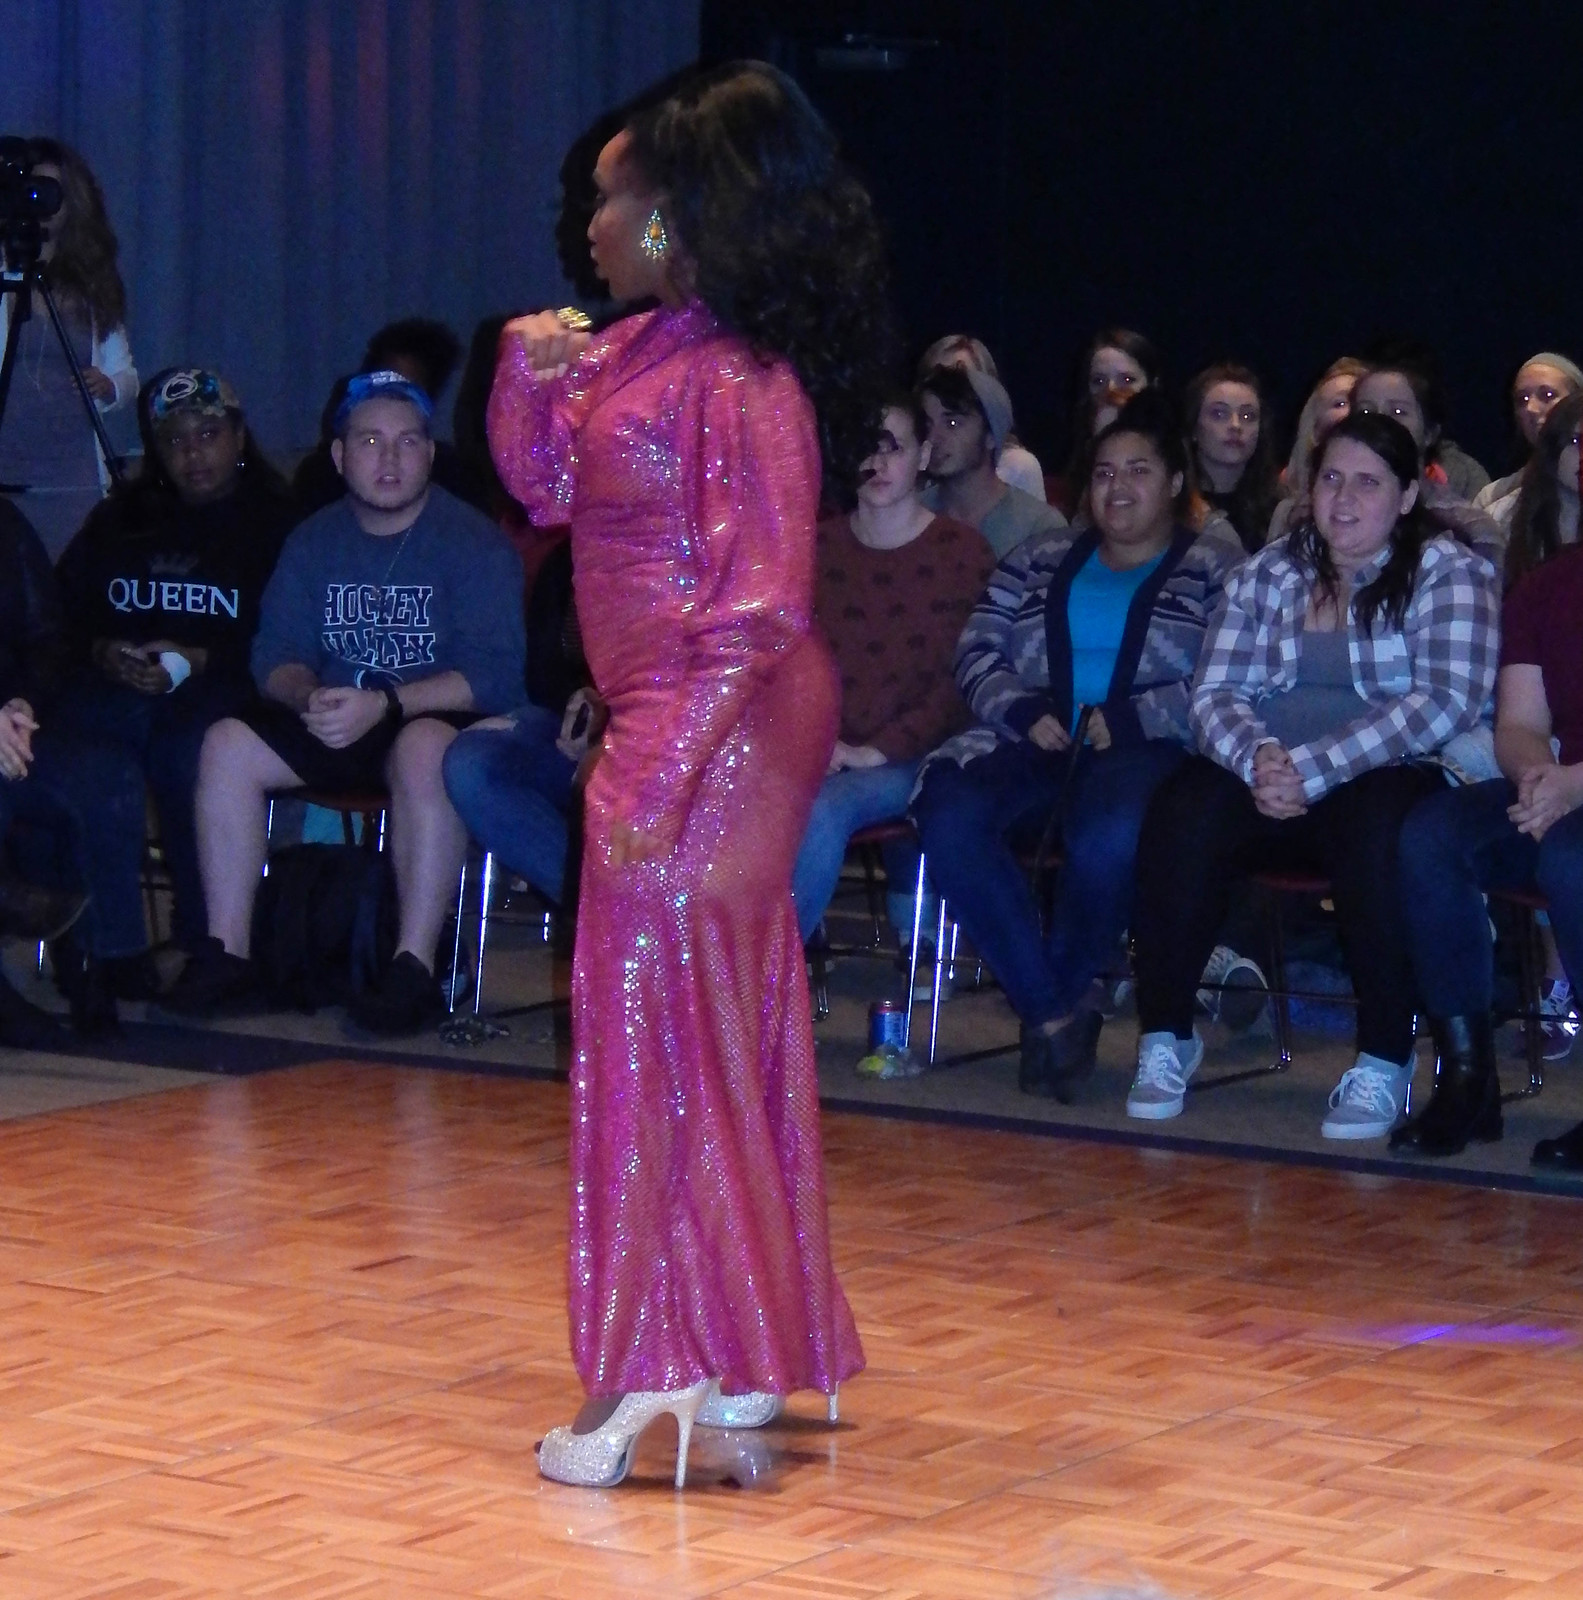 On November 2, 2016, Trigon, Penn State Univerosty-Behrend's LGBTQ student group, again held their annual Drag Show in the Reed Union Building. Thev event was very well attended and there was also an amateur drag competition.